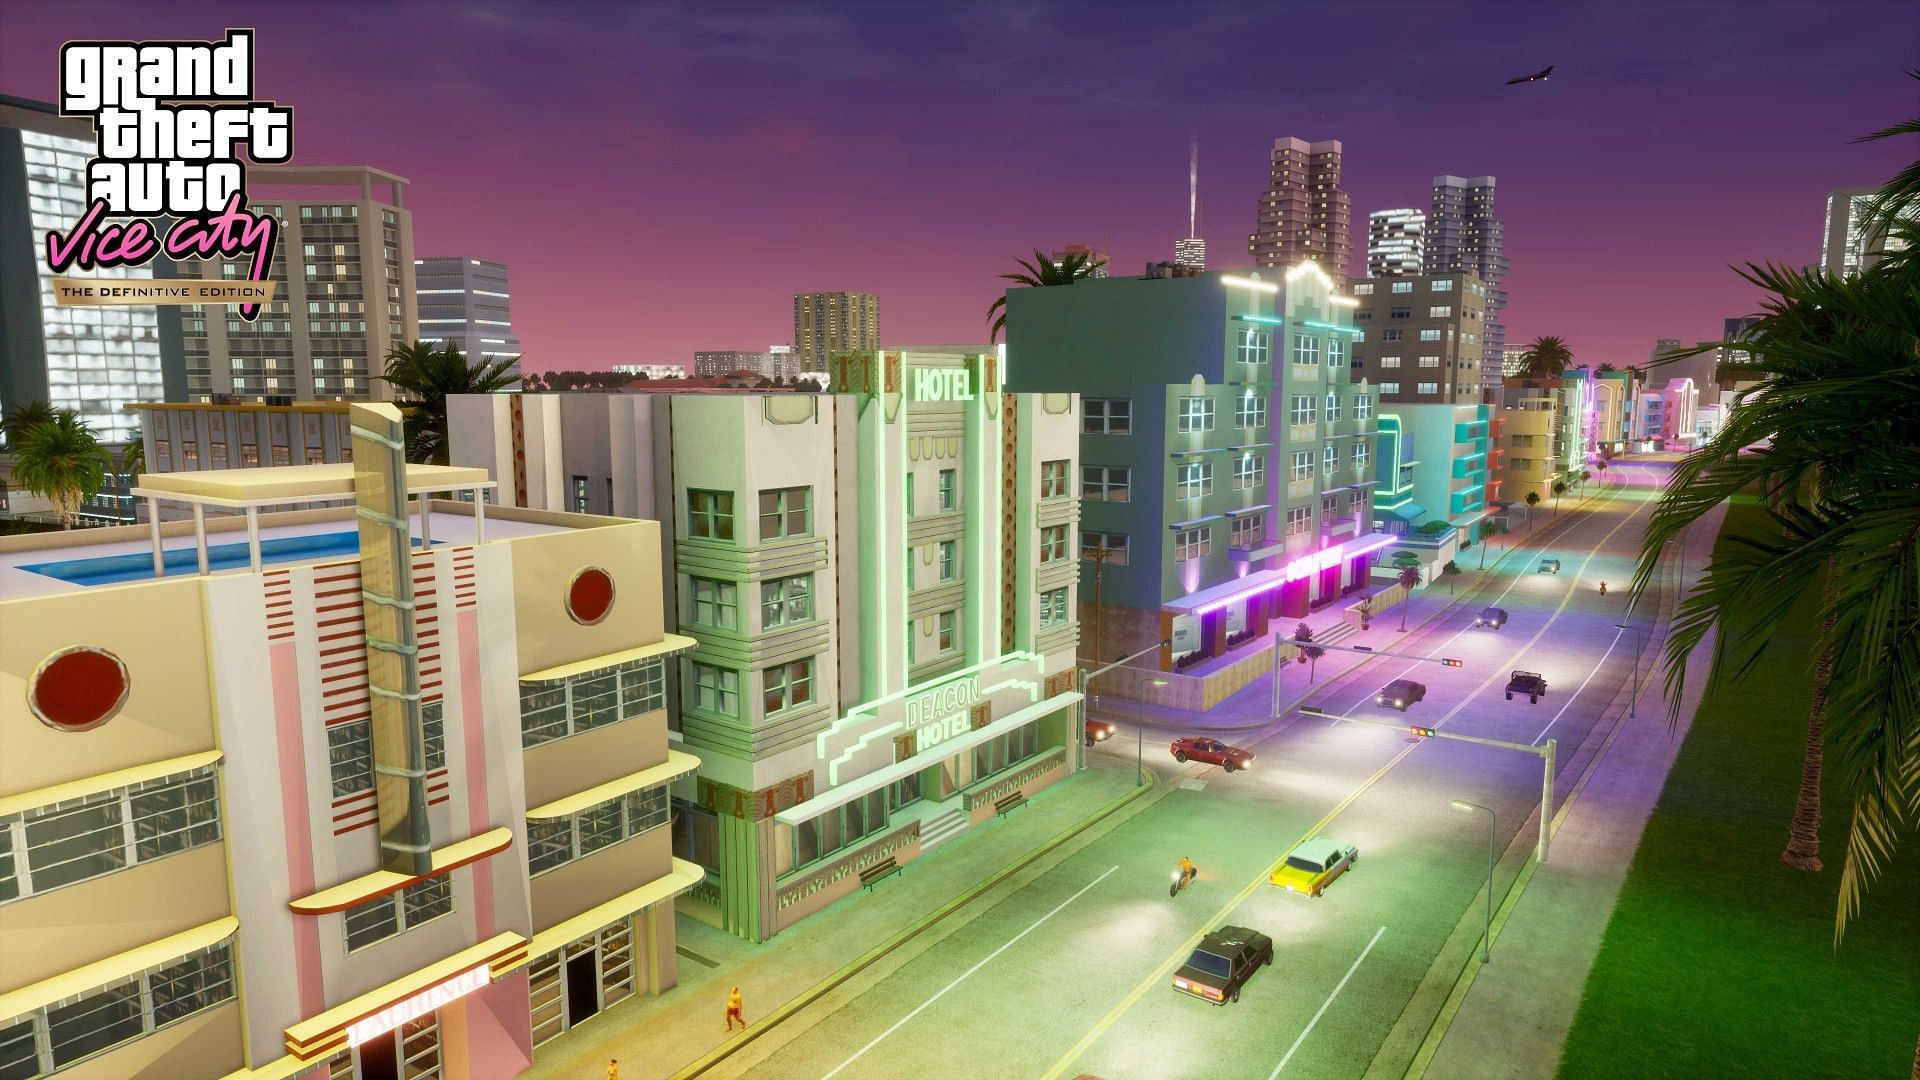 Vice City is an iconic location in the GTA franchise (image via GTABase)